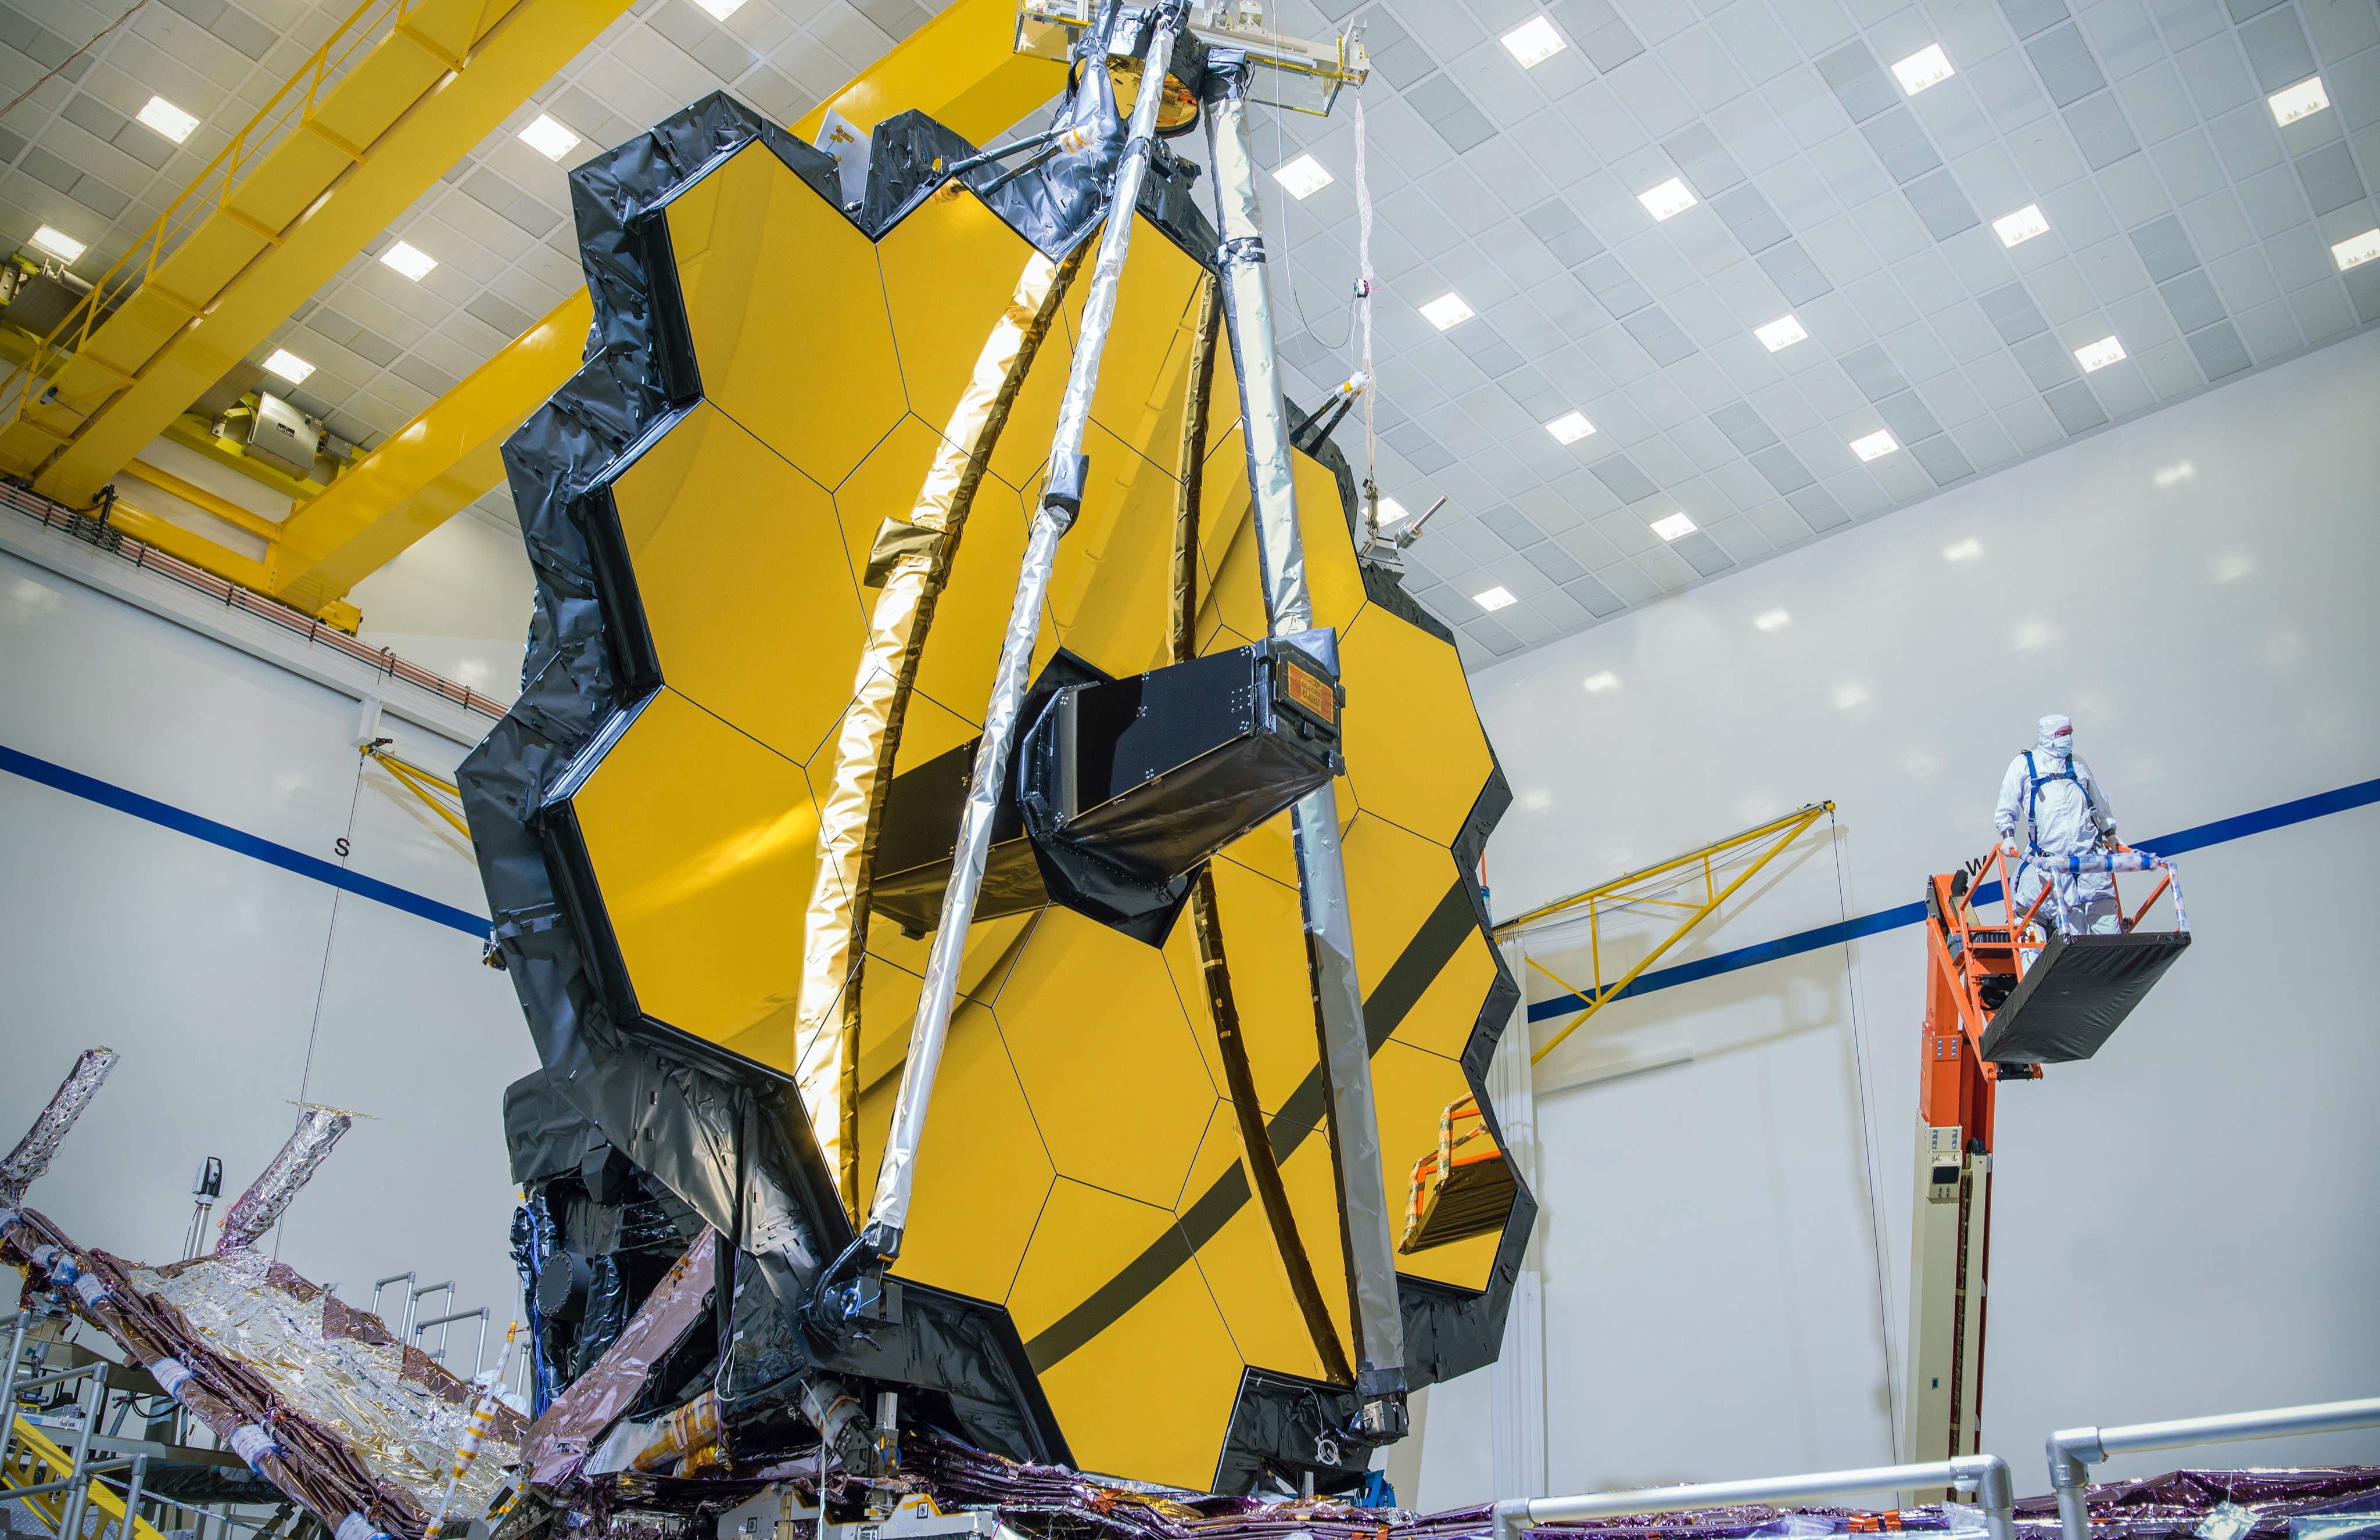 Webb Telescope helps measure temperature of exoplanet, 40 light years from Earth